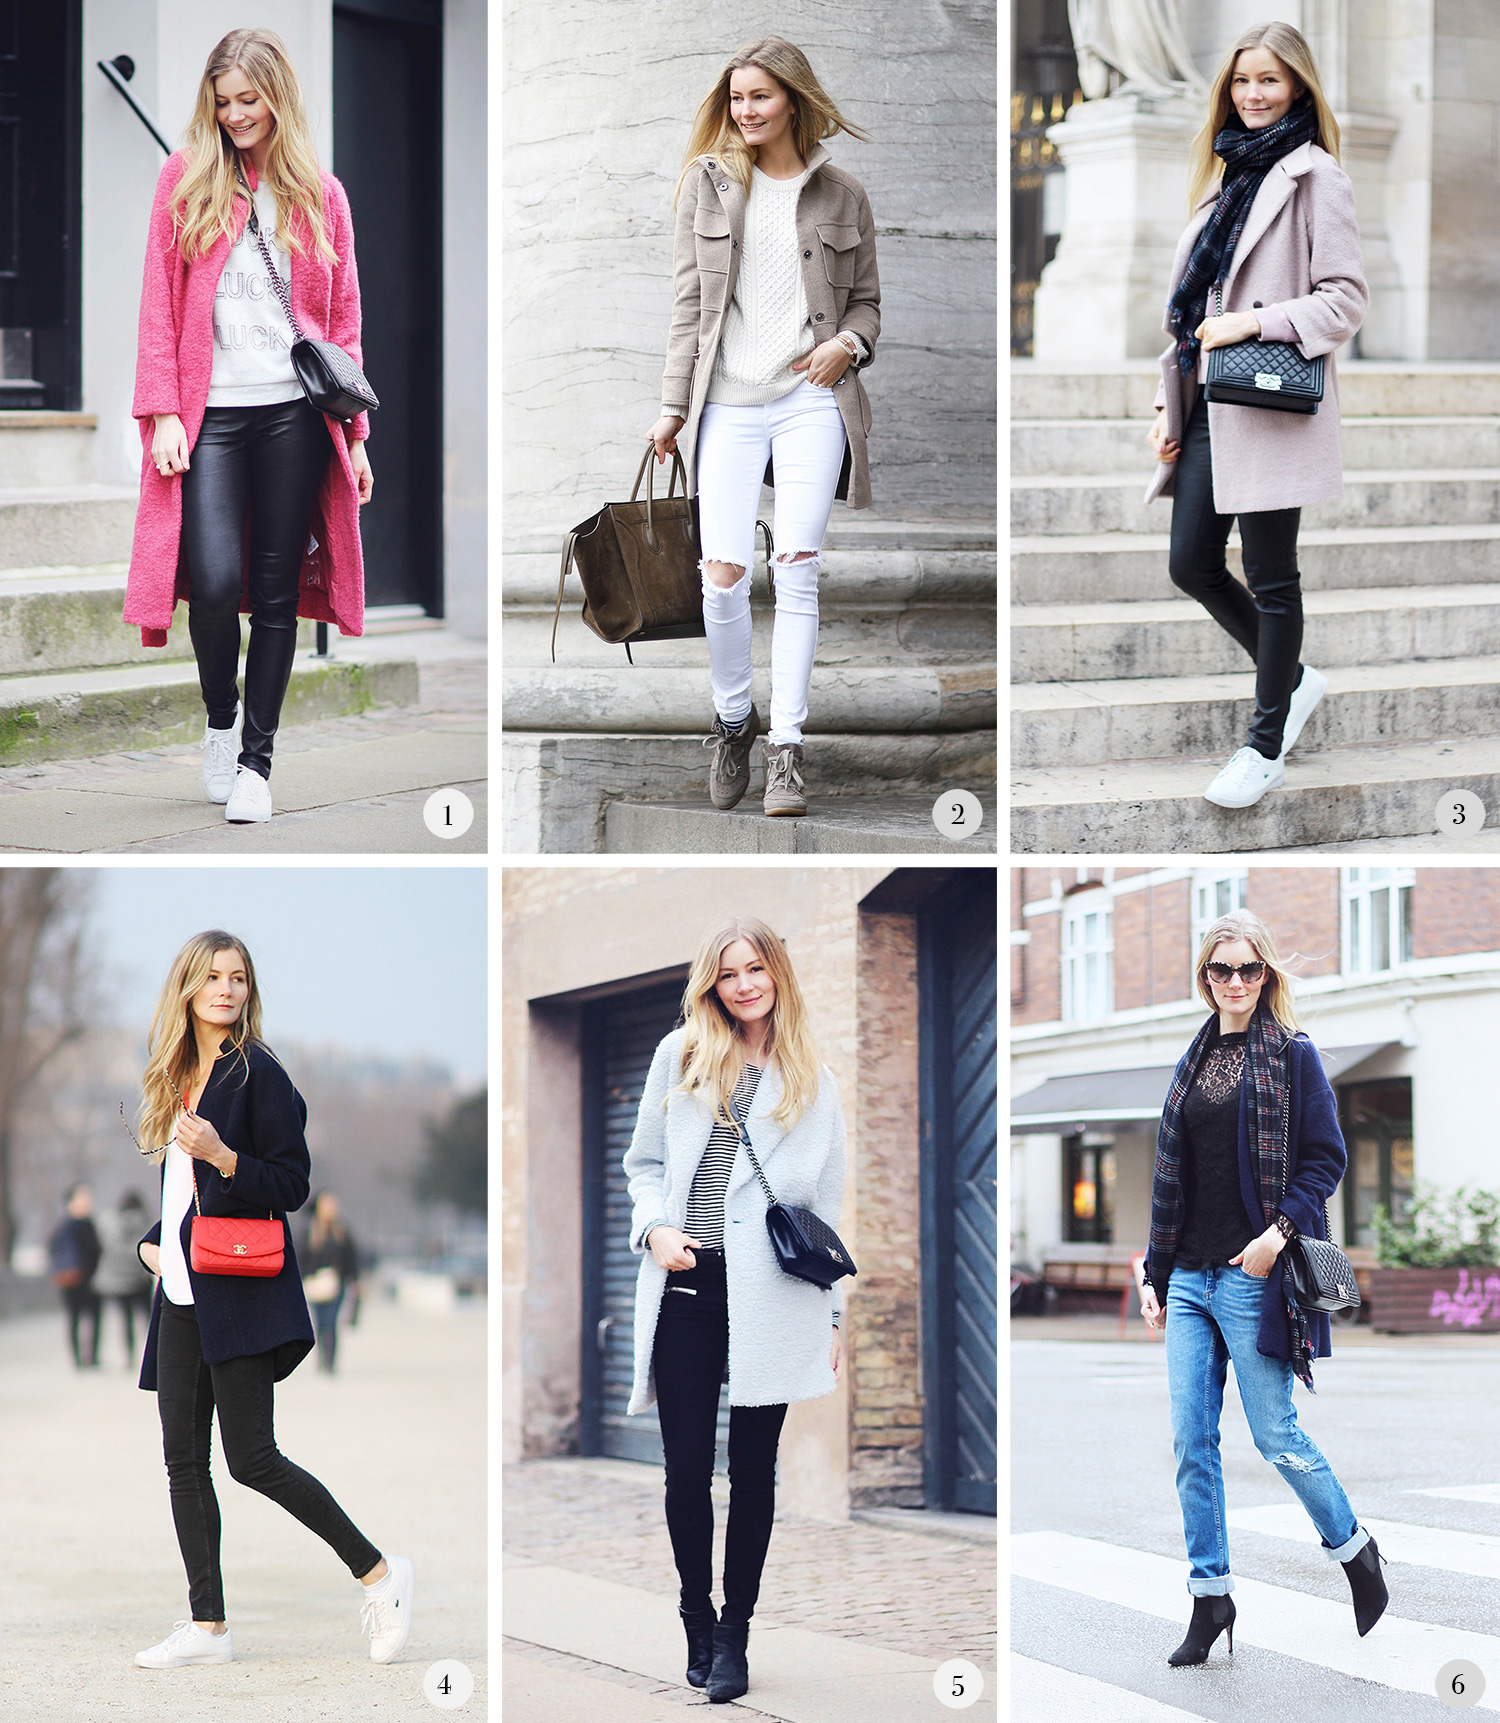 Outfits 2015 march-may Christina Dueholm